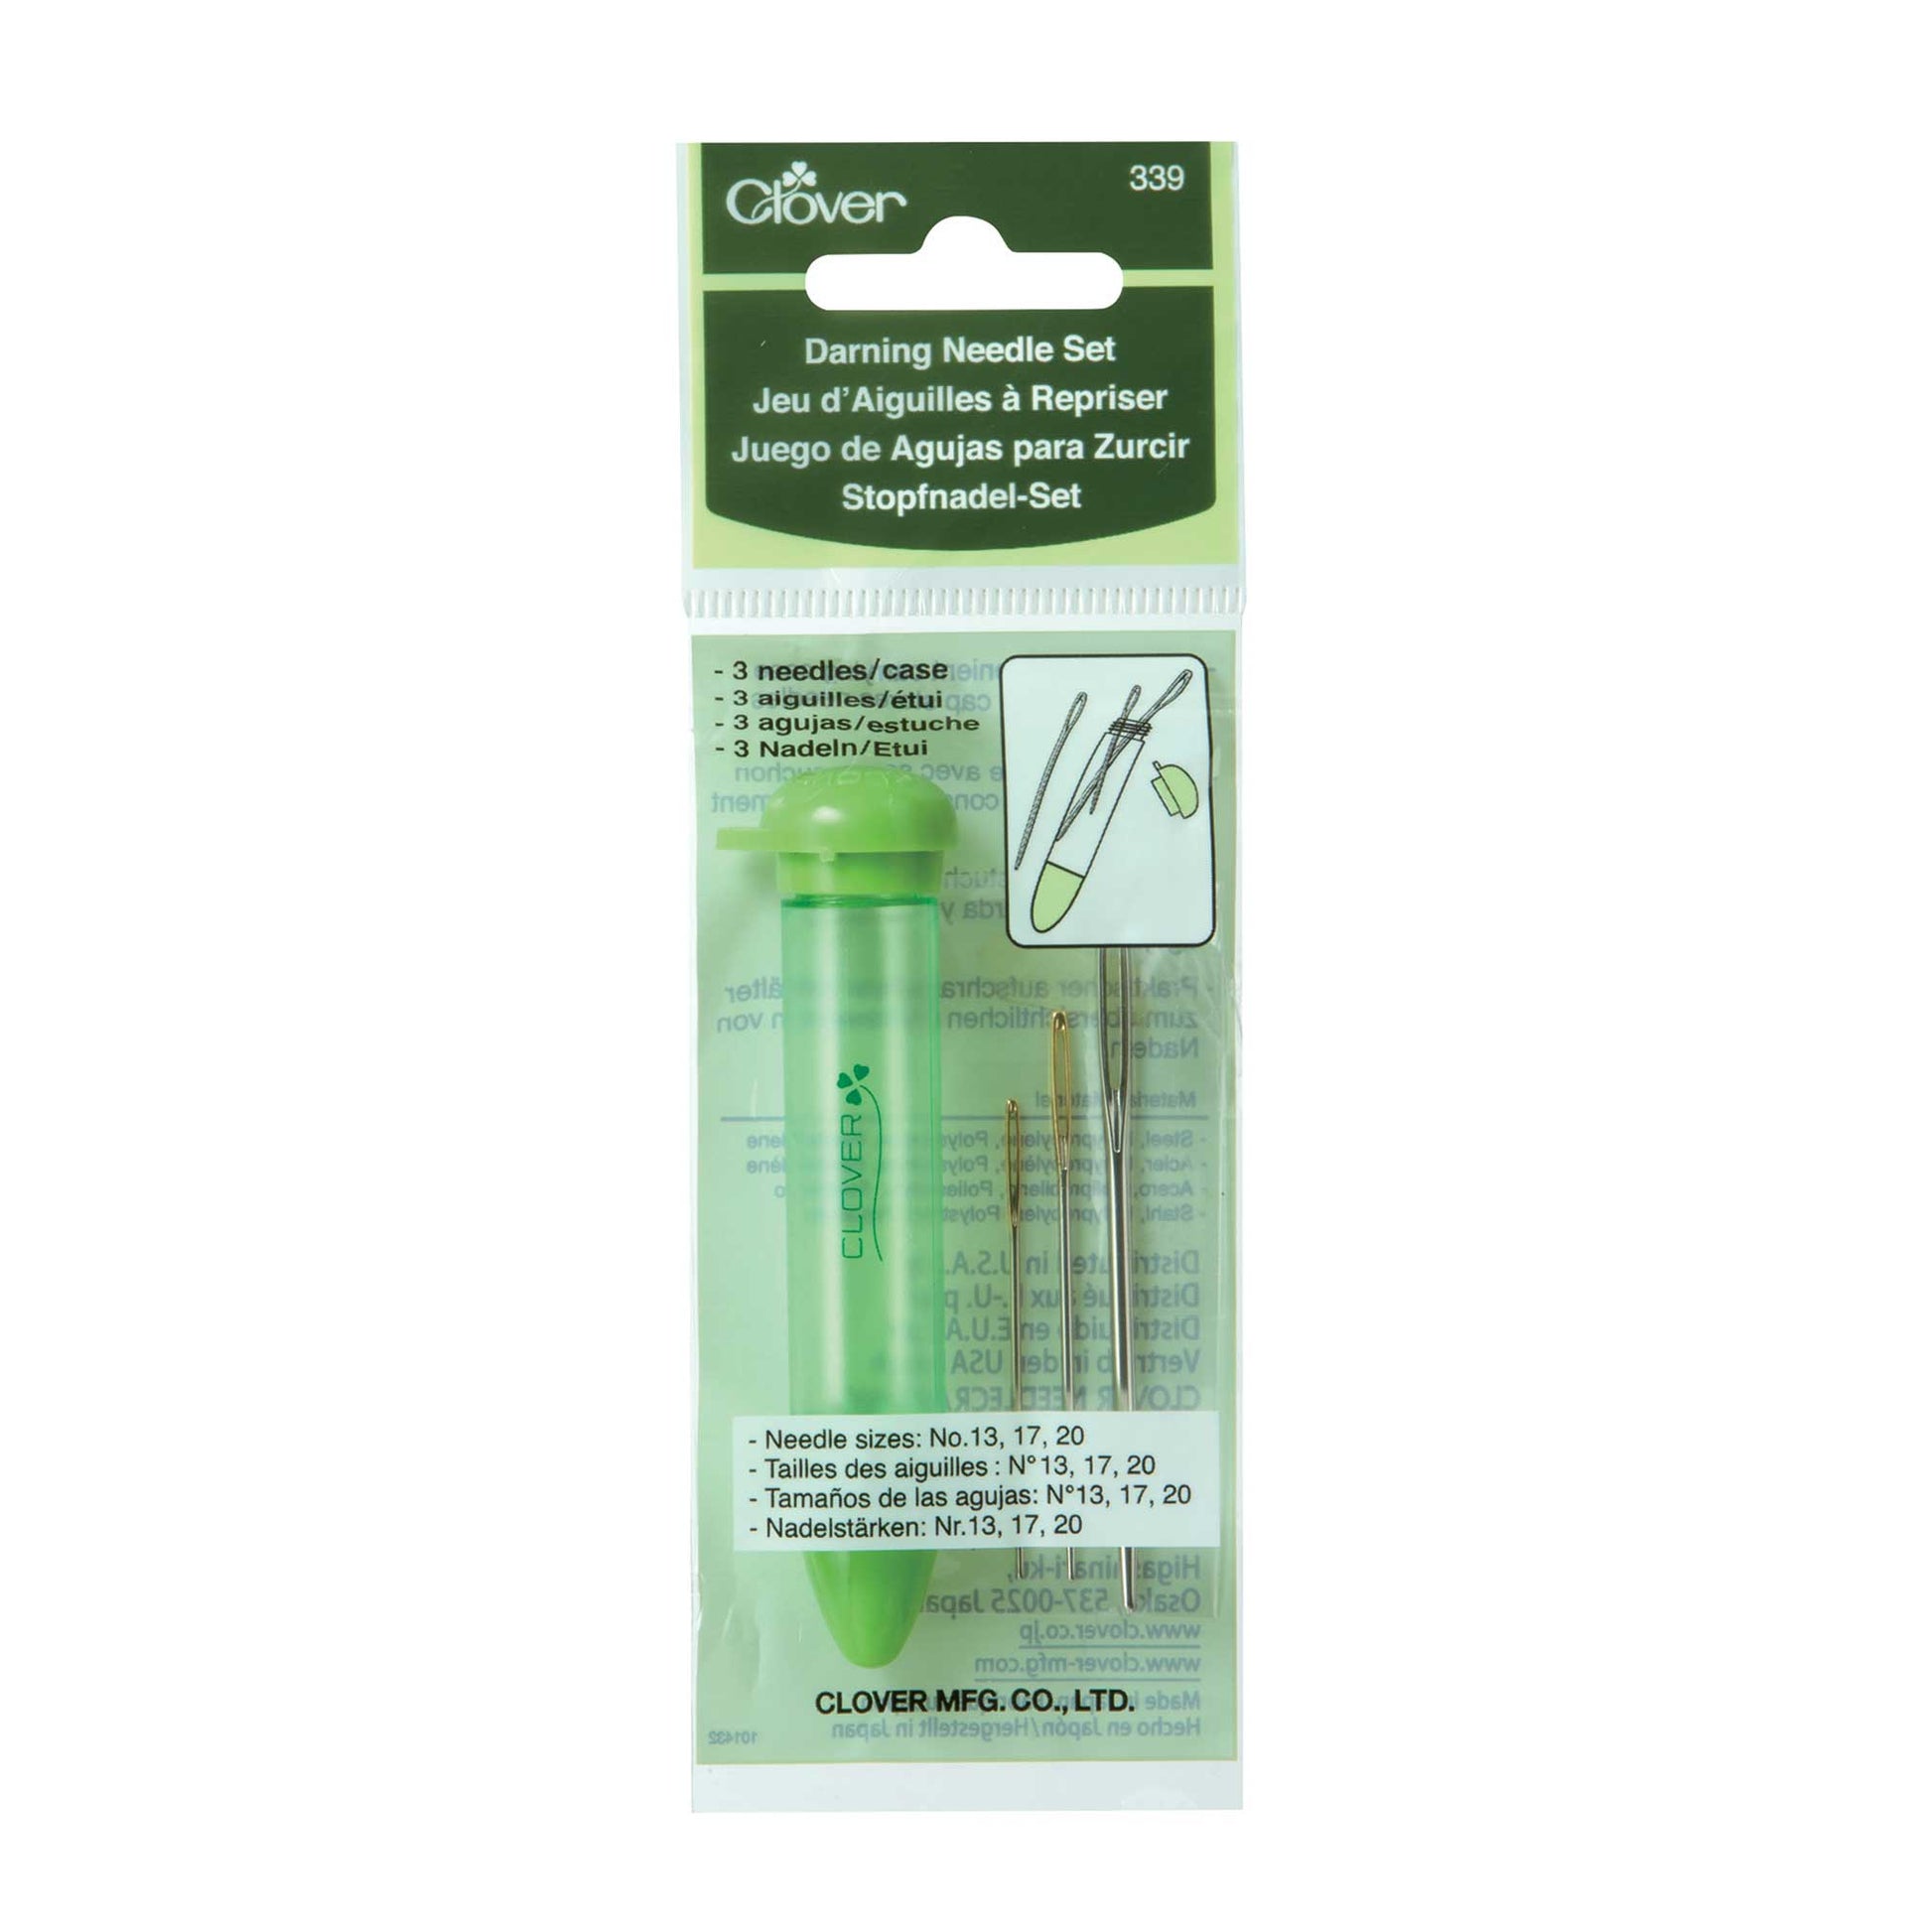 CloverClover Darning Needles Set GreenDarning needles are essential for hand-knitting, including darning and grafting.Yarn-friendly darning needles that prevent yarns from splitting with their rounded tiInspired by Margot Clover Darning Needles Set Green